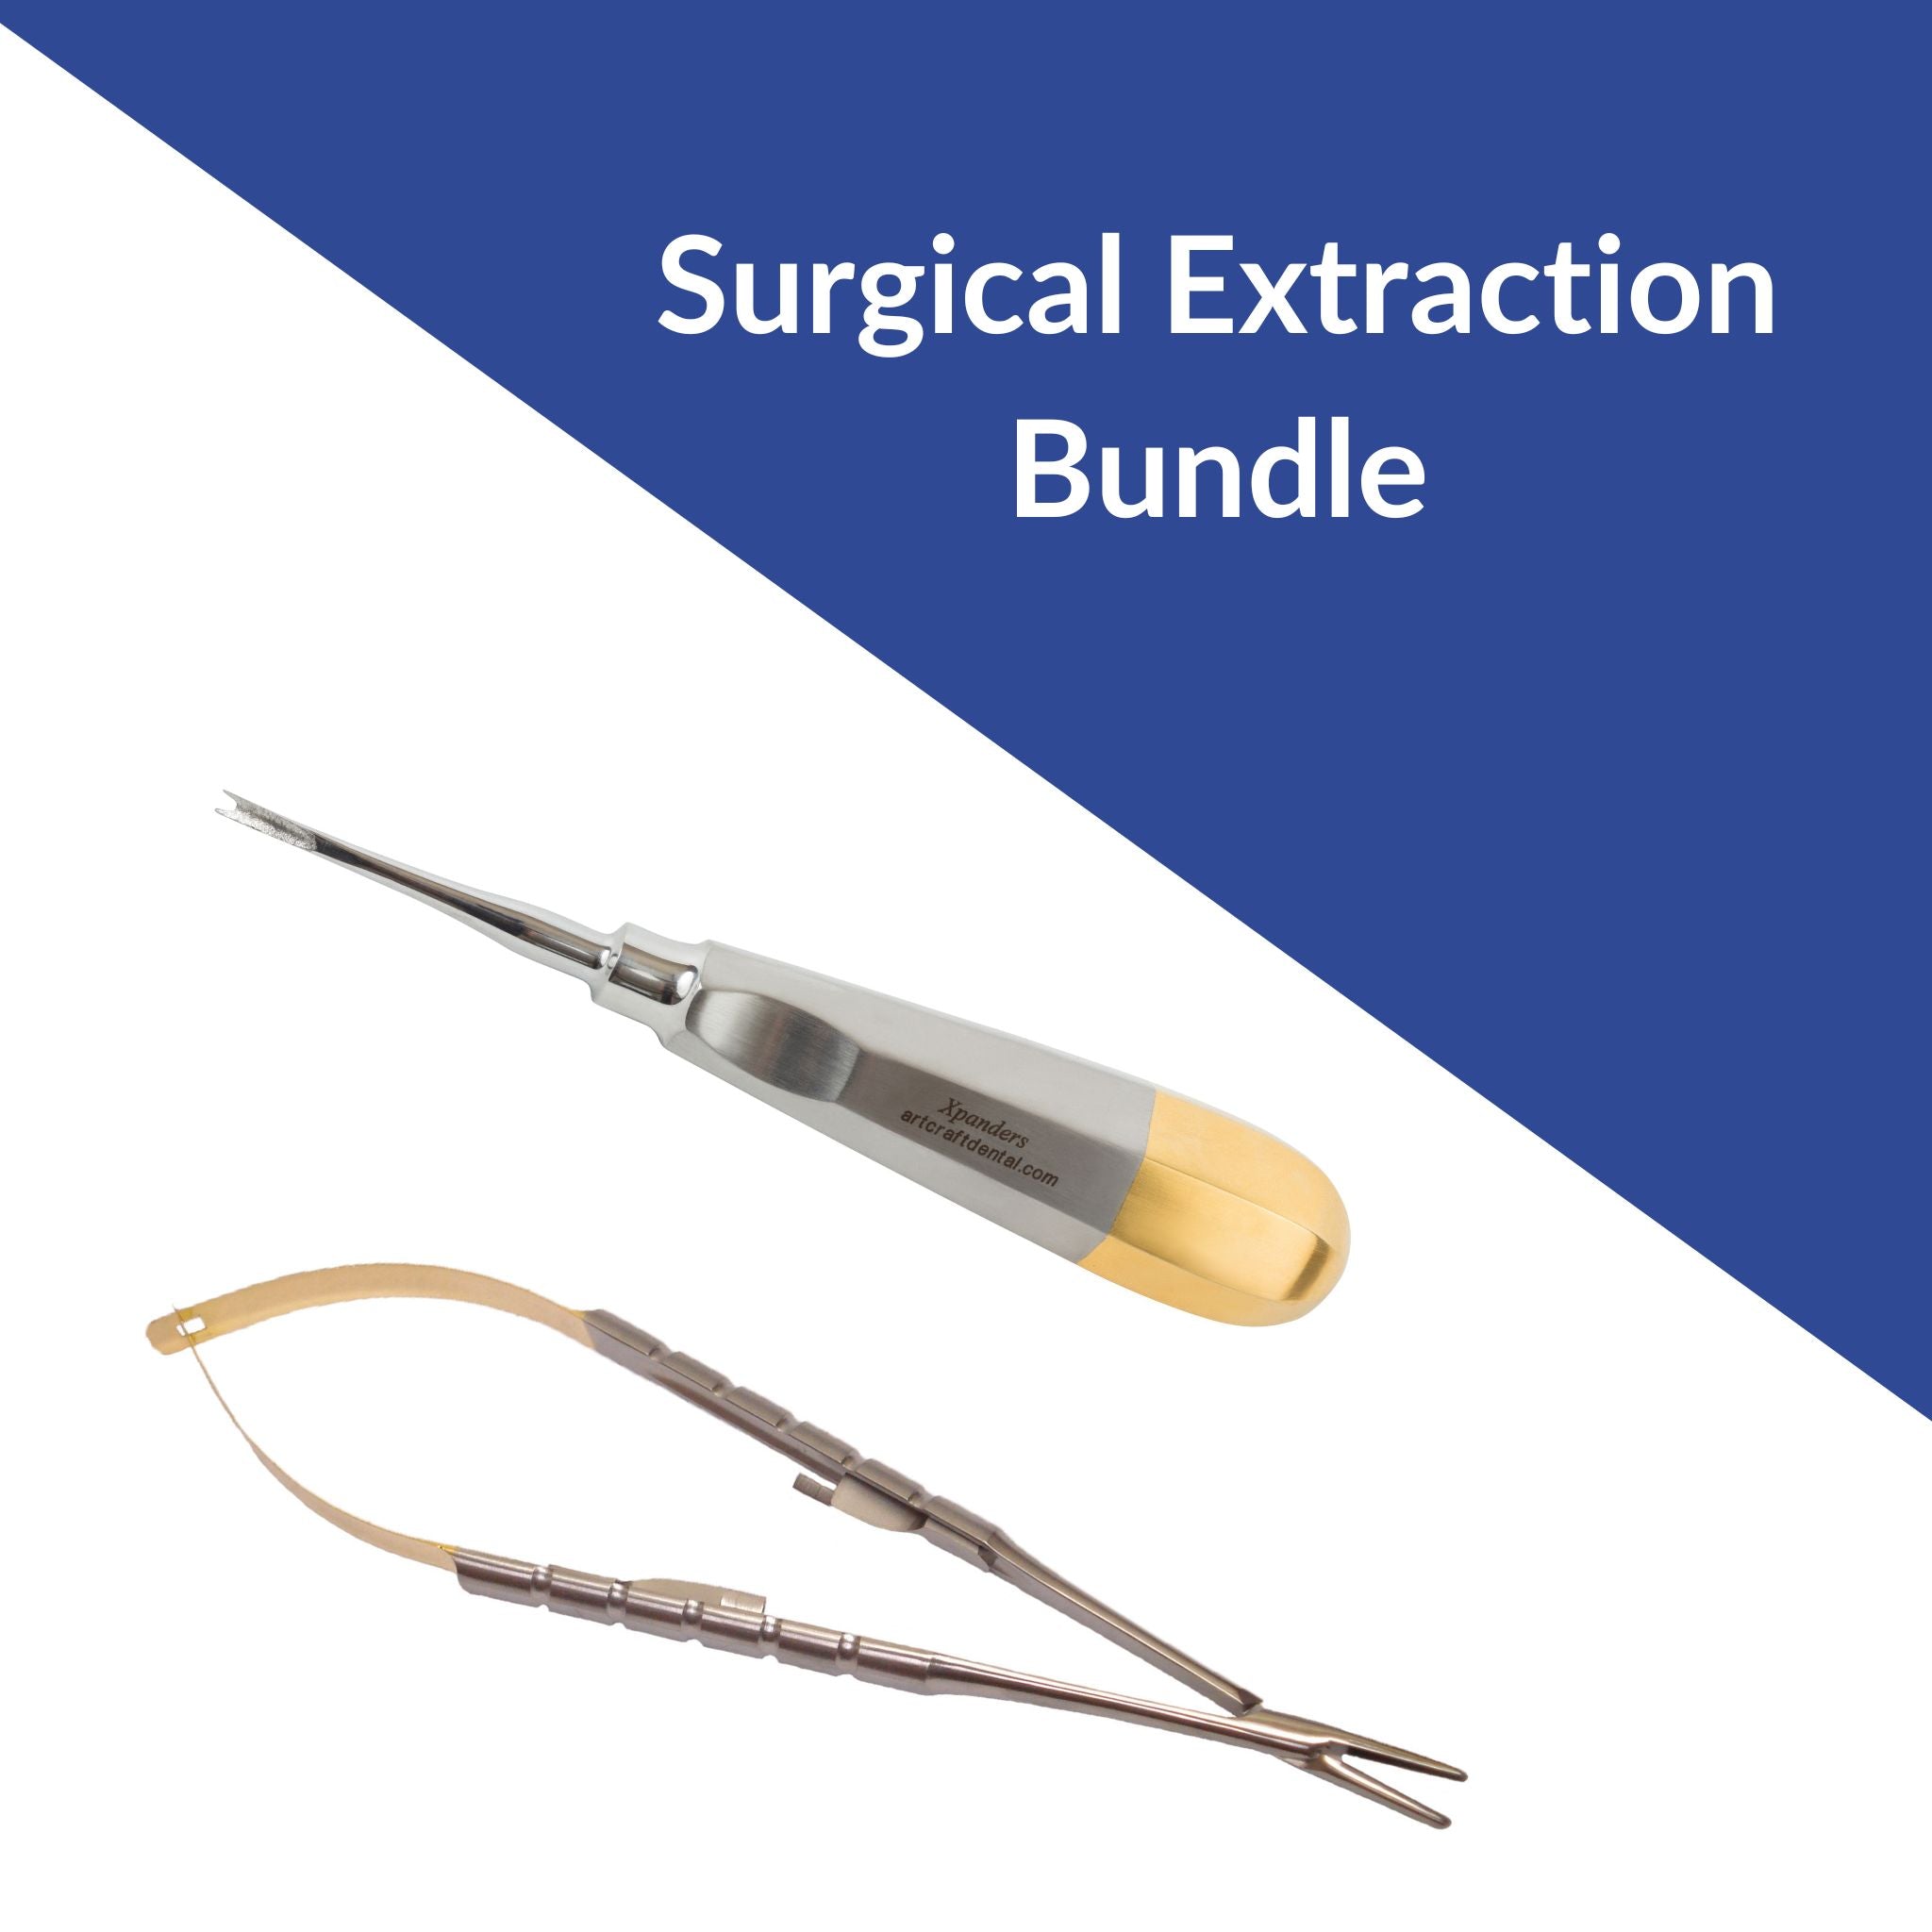 Surgical Extraction Bundle